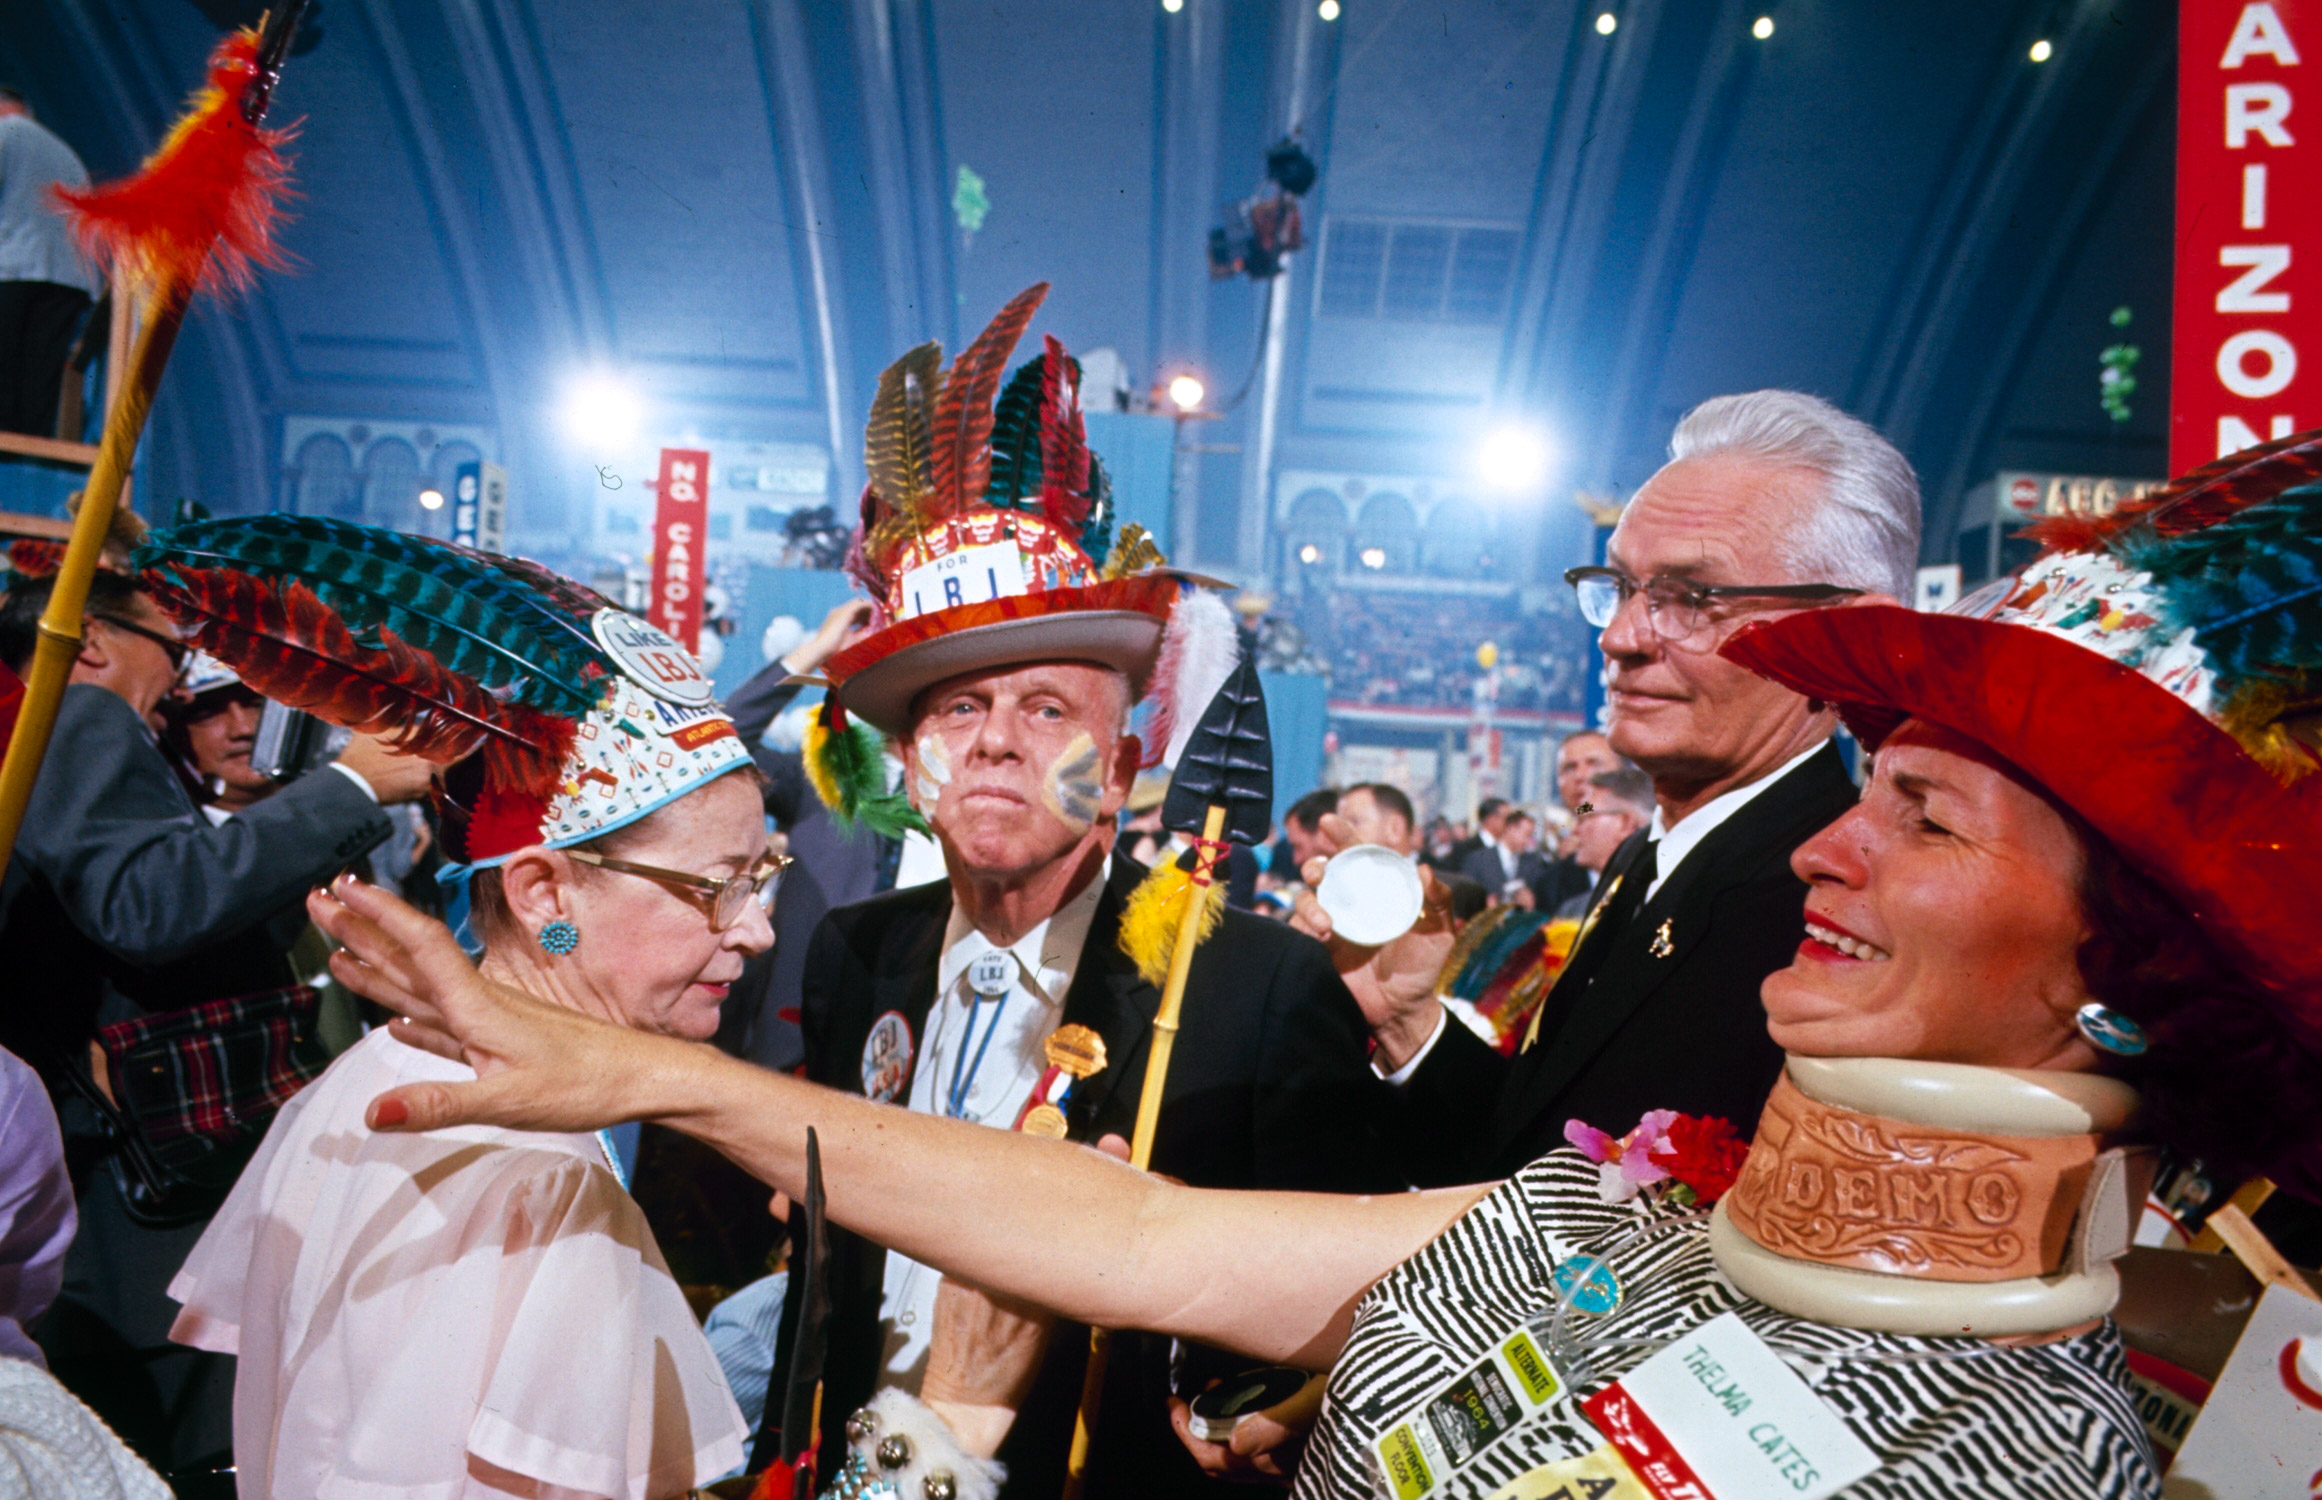 Colorful hats and clothing at the Democratic National Convention, 1964.